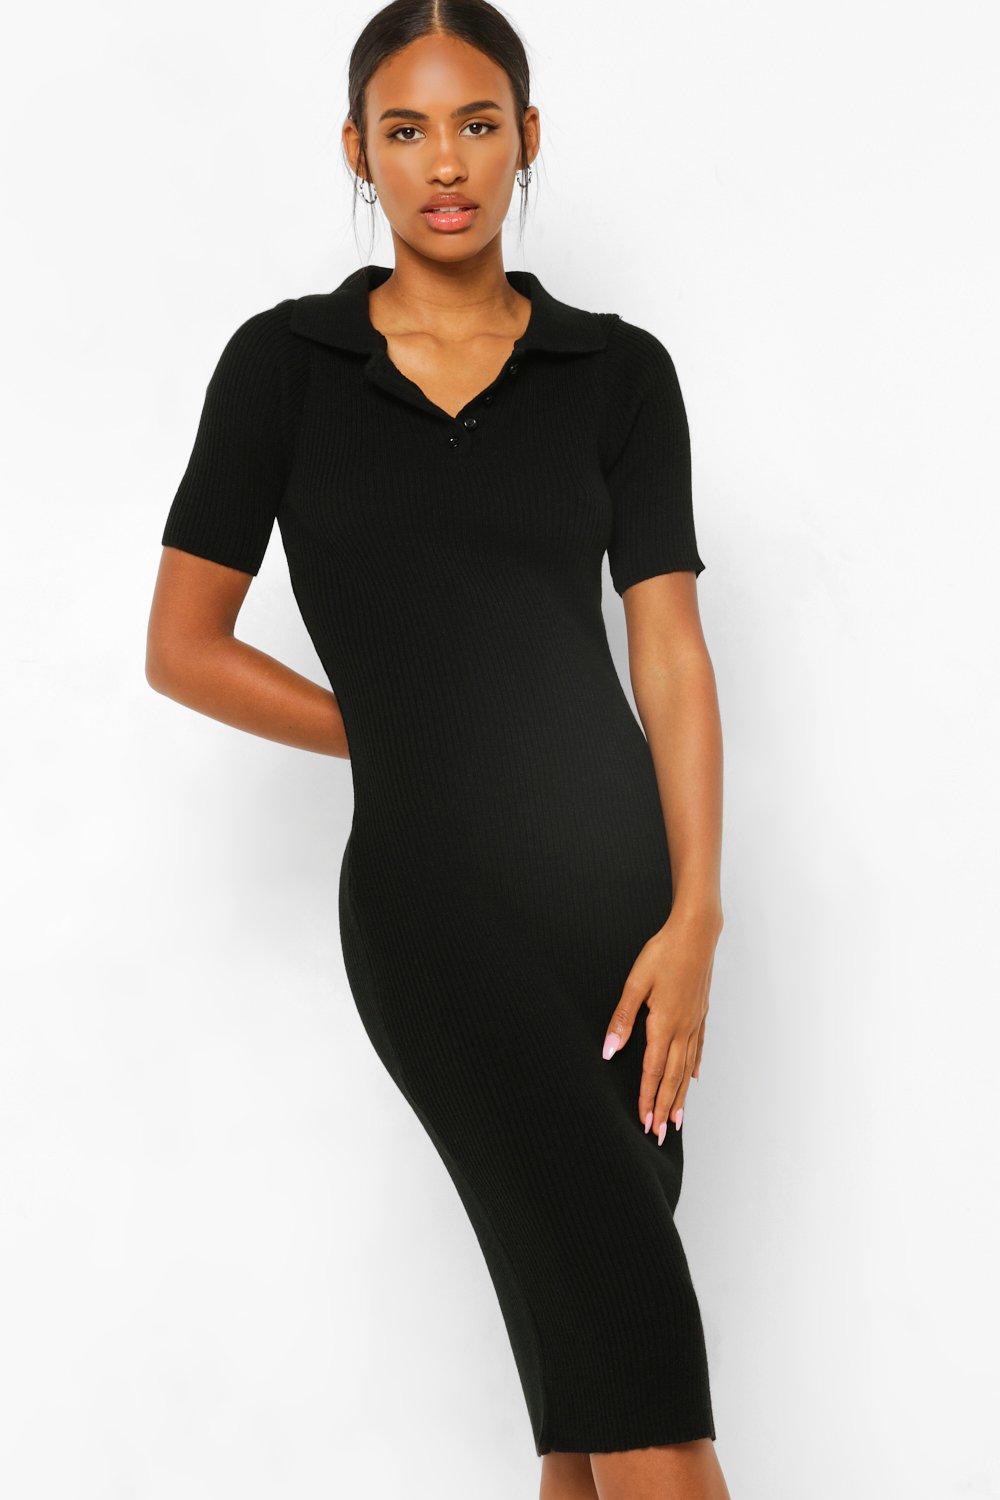 UK Women Ladies Short sleeve Knitted Black Collared Bodycon Mini Party Dress